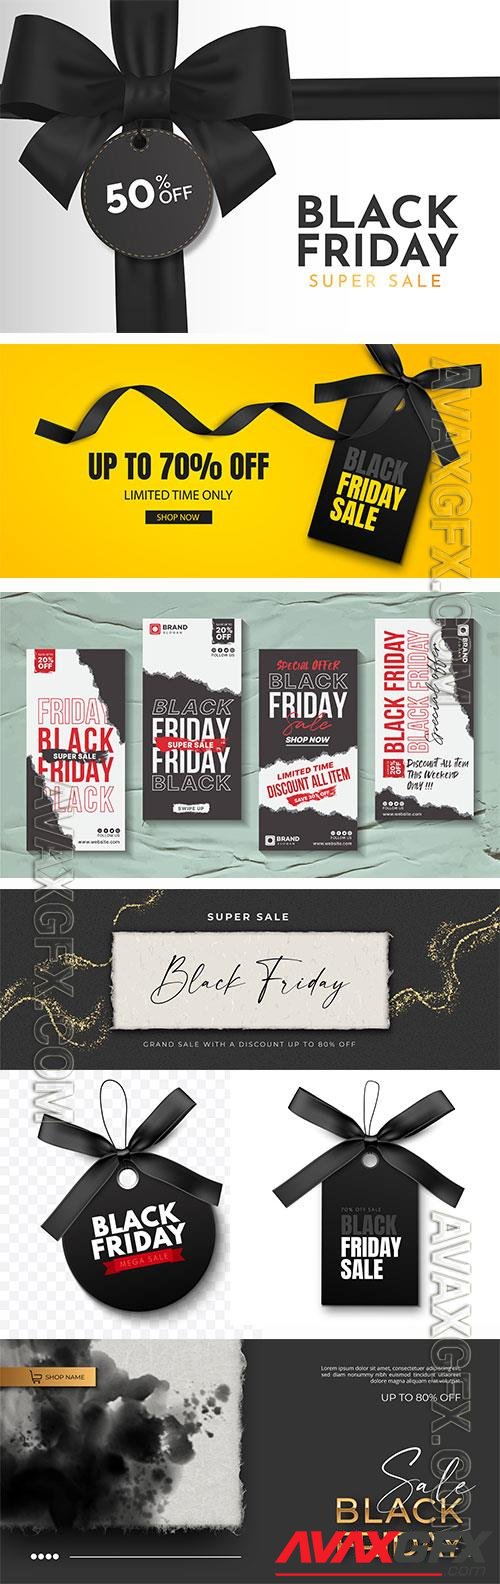 Black friday sale banner with vector realistic 3d objects